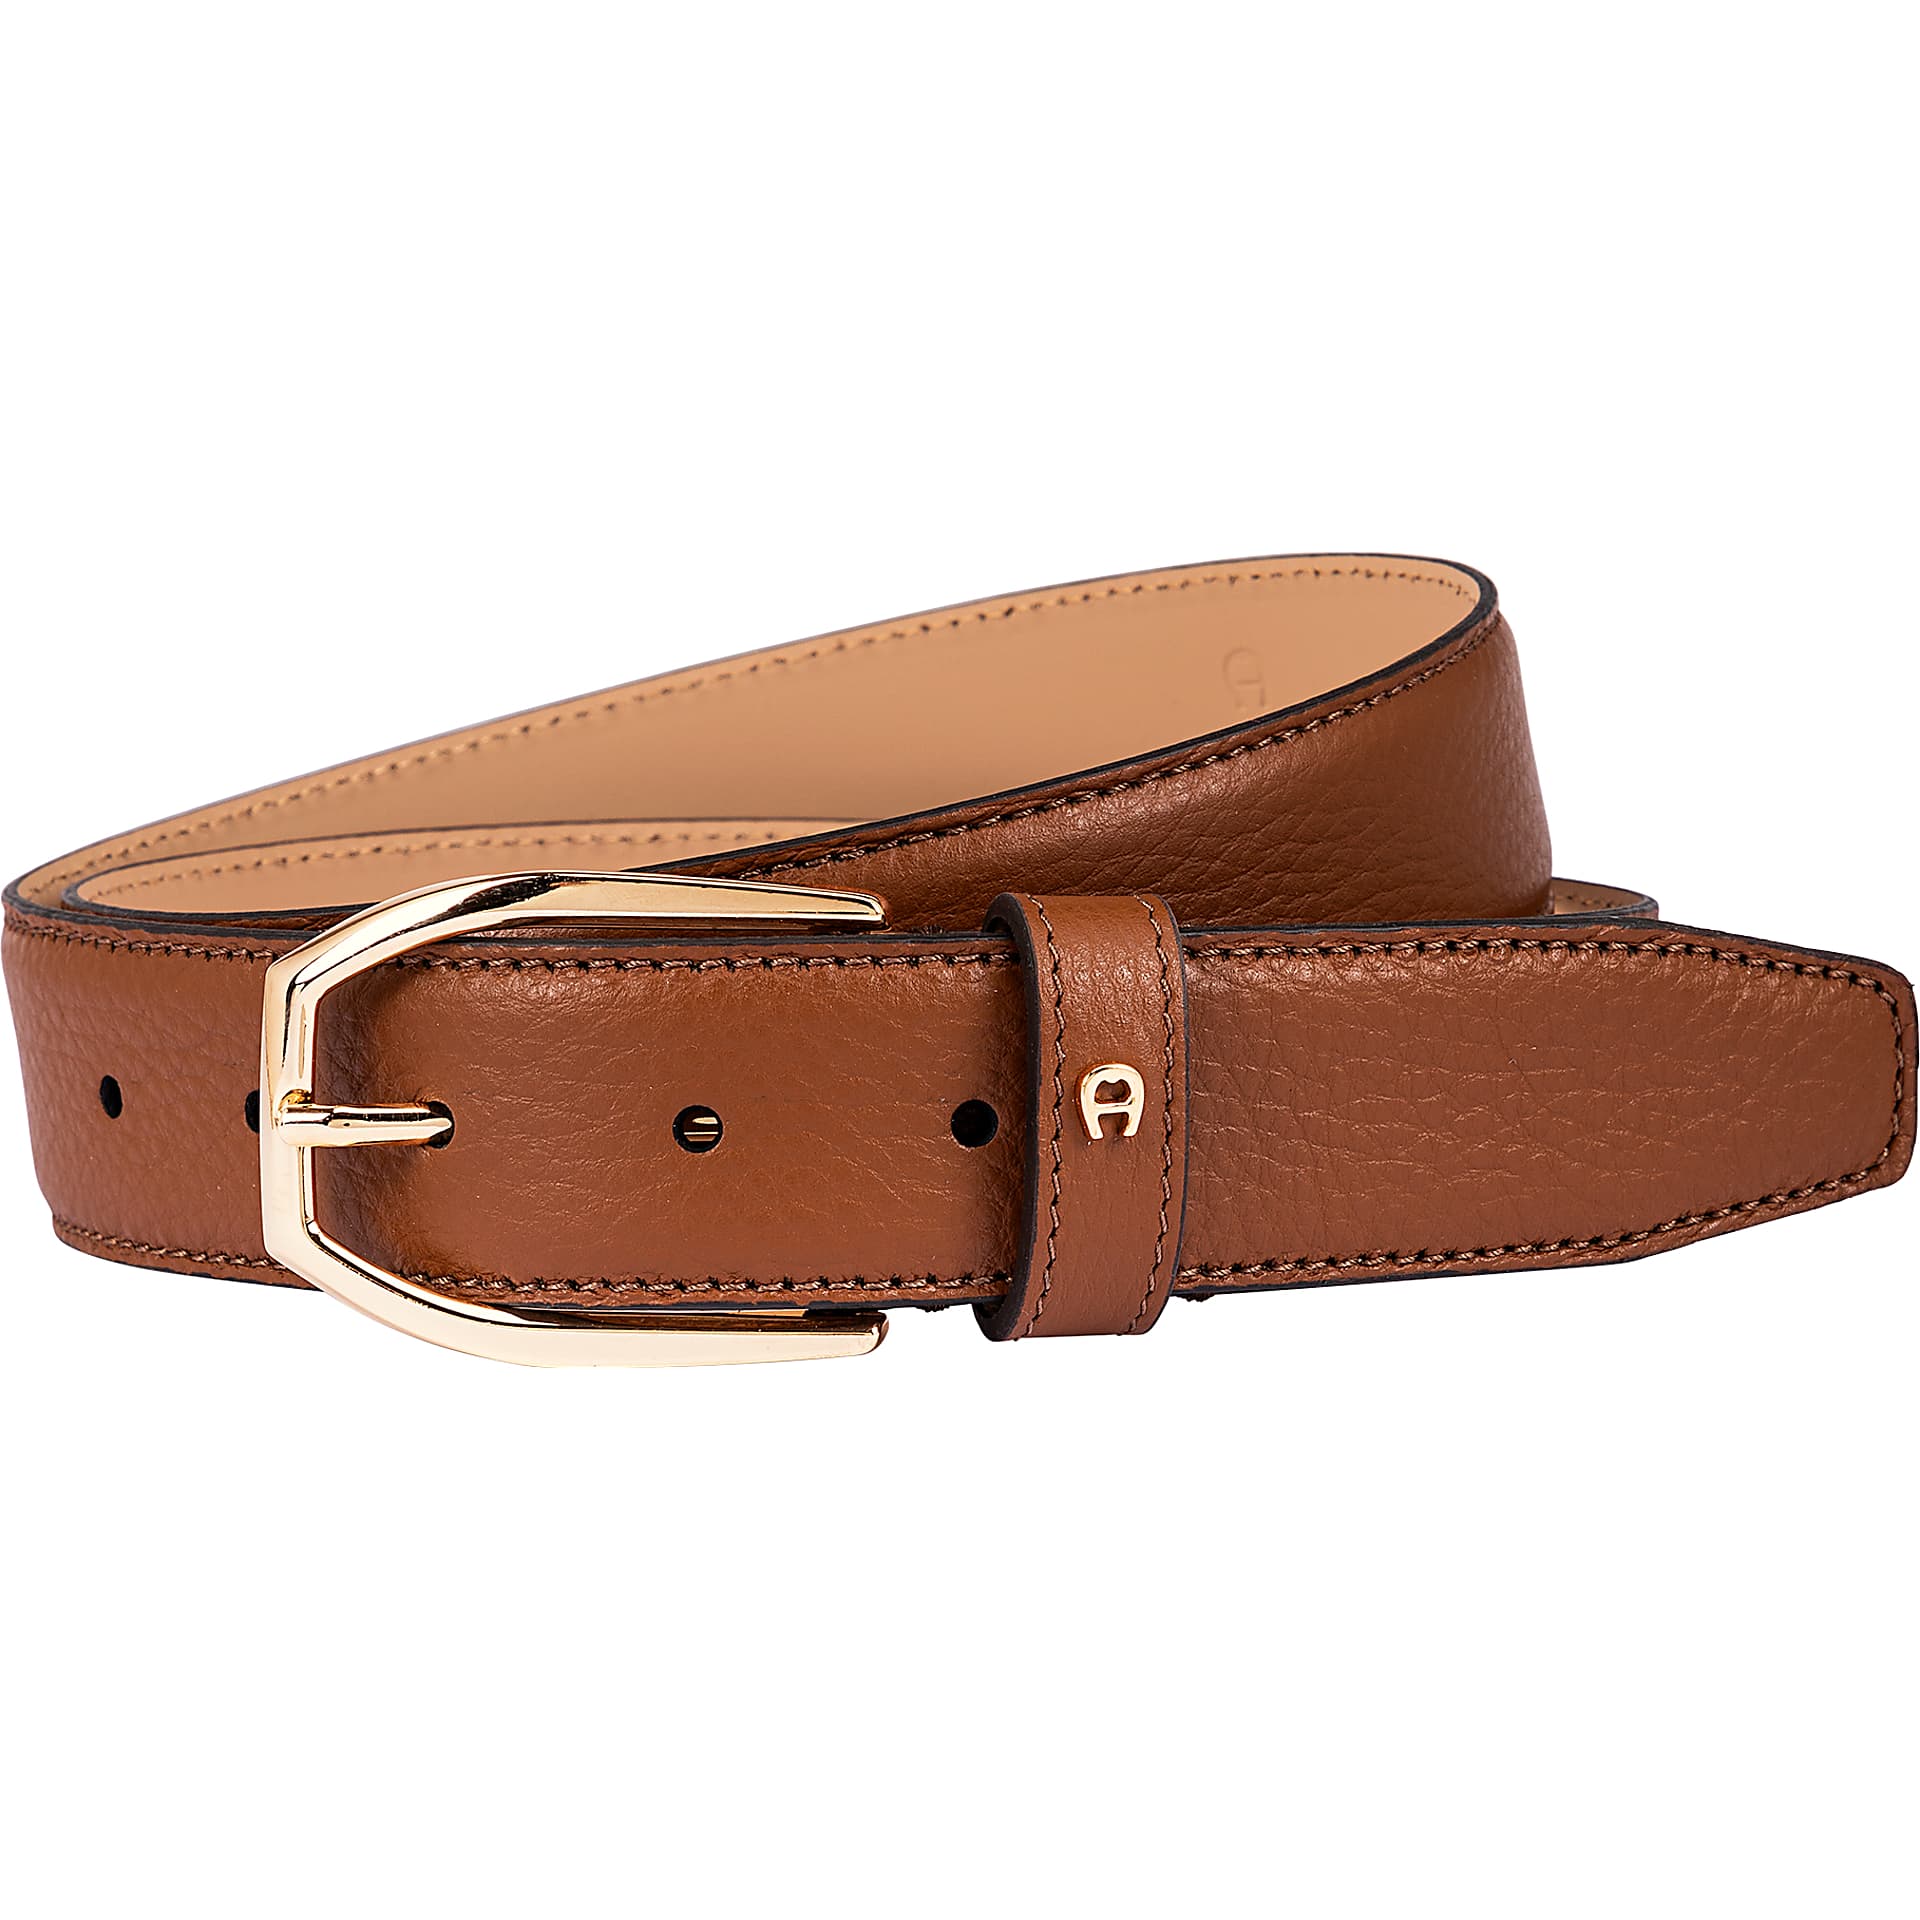 Quality leather belts for women online - Aigner